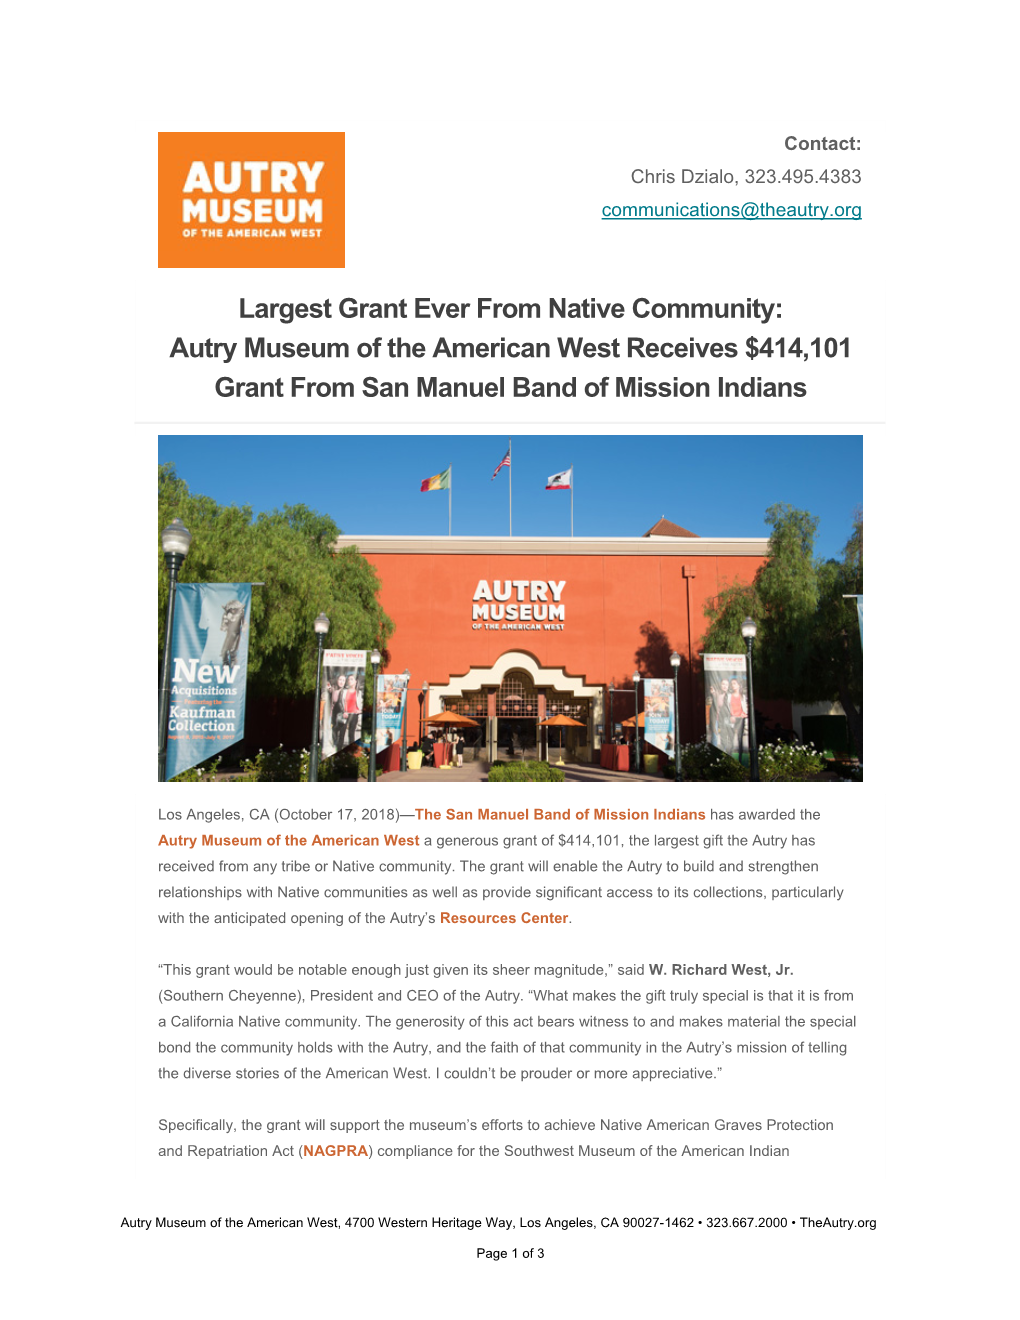 Autry Museum of the American West Receives $414101 Grant from San